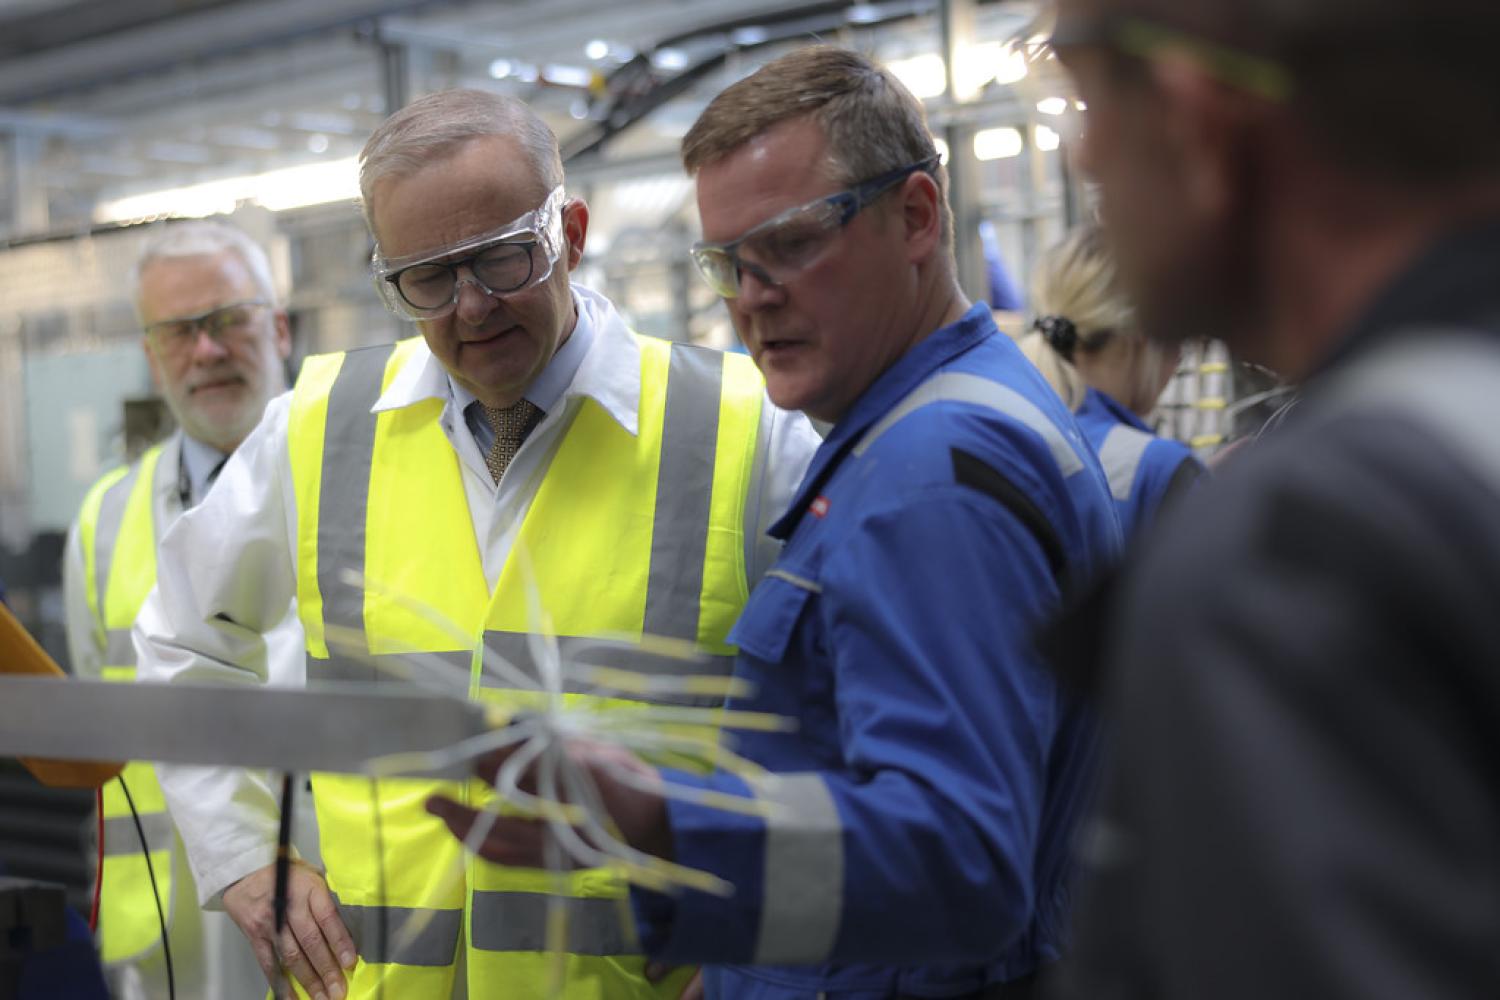 Australian Prime Minister Anthony Albanese visits apprentices at the Barrow-in-Furness shipyard, UK. (Flickr/UK Government)